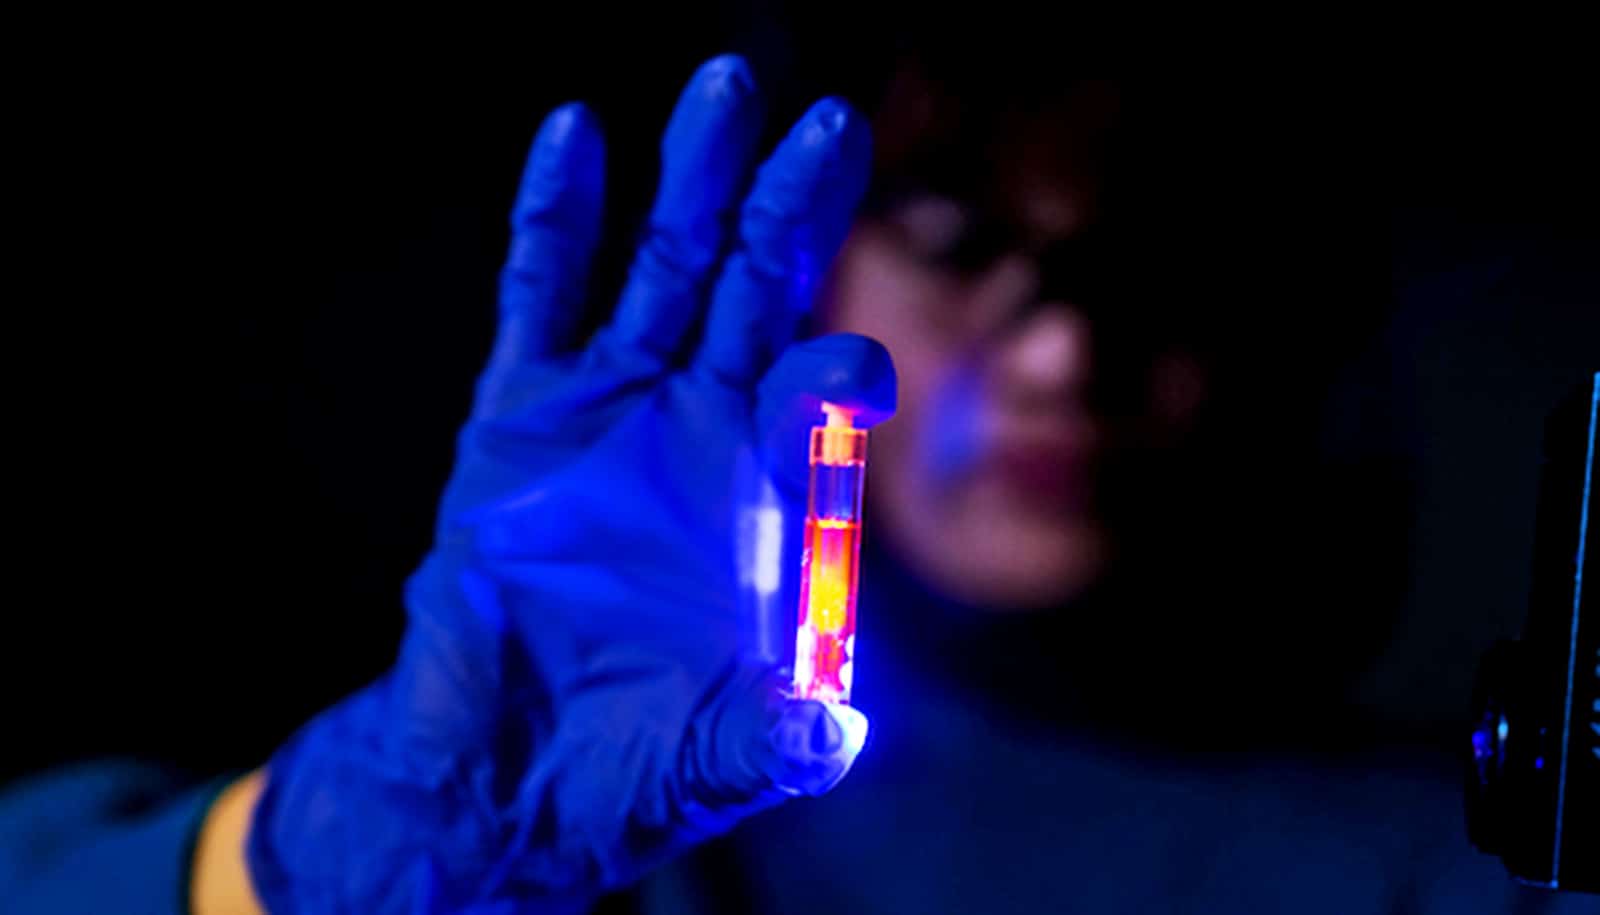 A researcher wearing blue gloves holds up a glowing orange vial in a dark room.